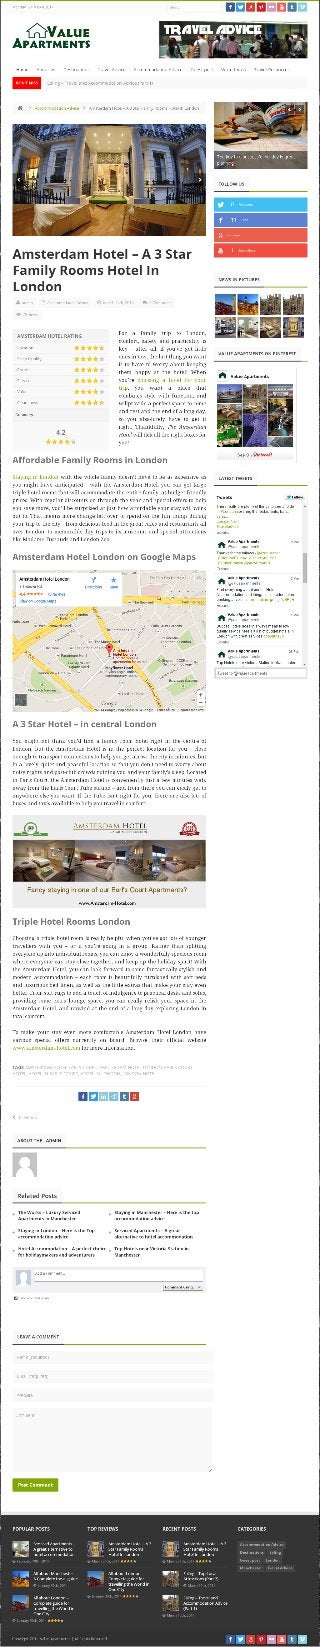 Amsterdam Hotel London – A 3 star Hotel that fulfills all of your requirements.